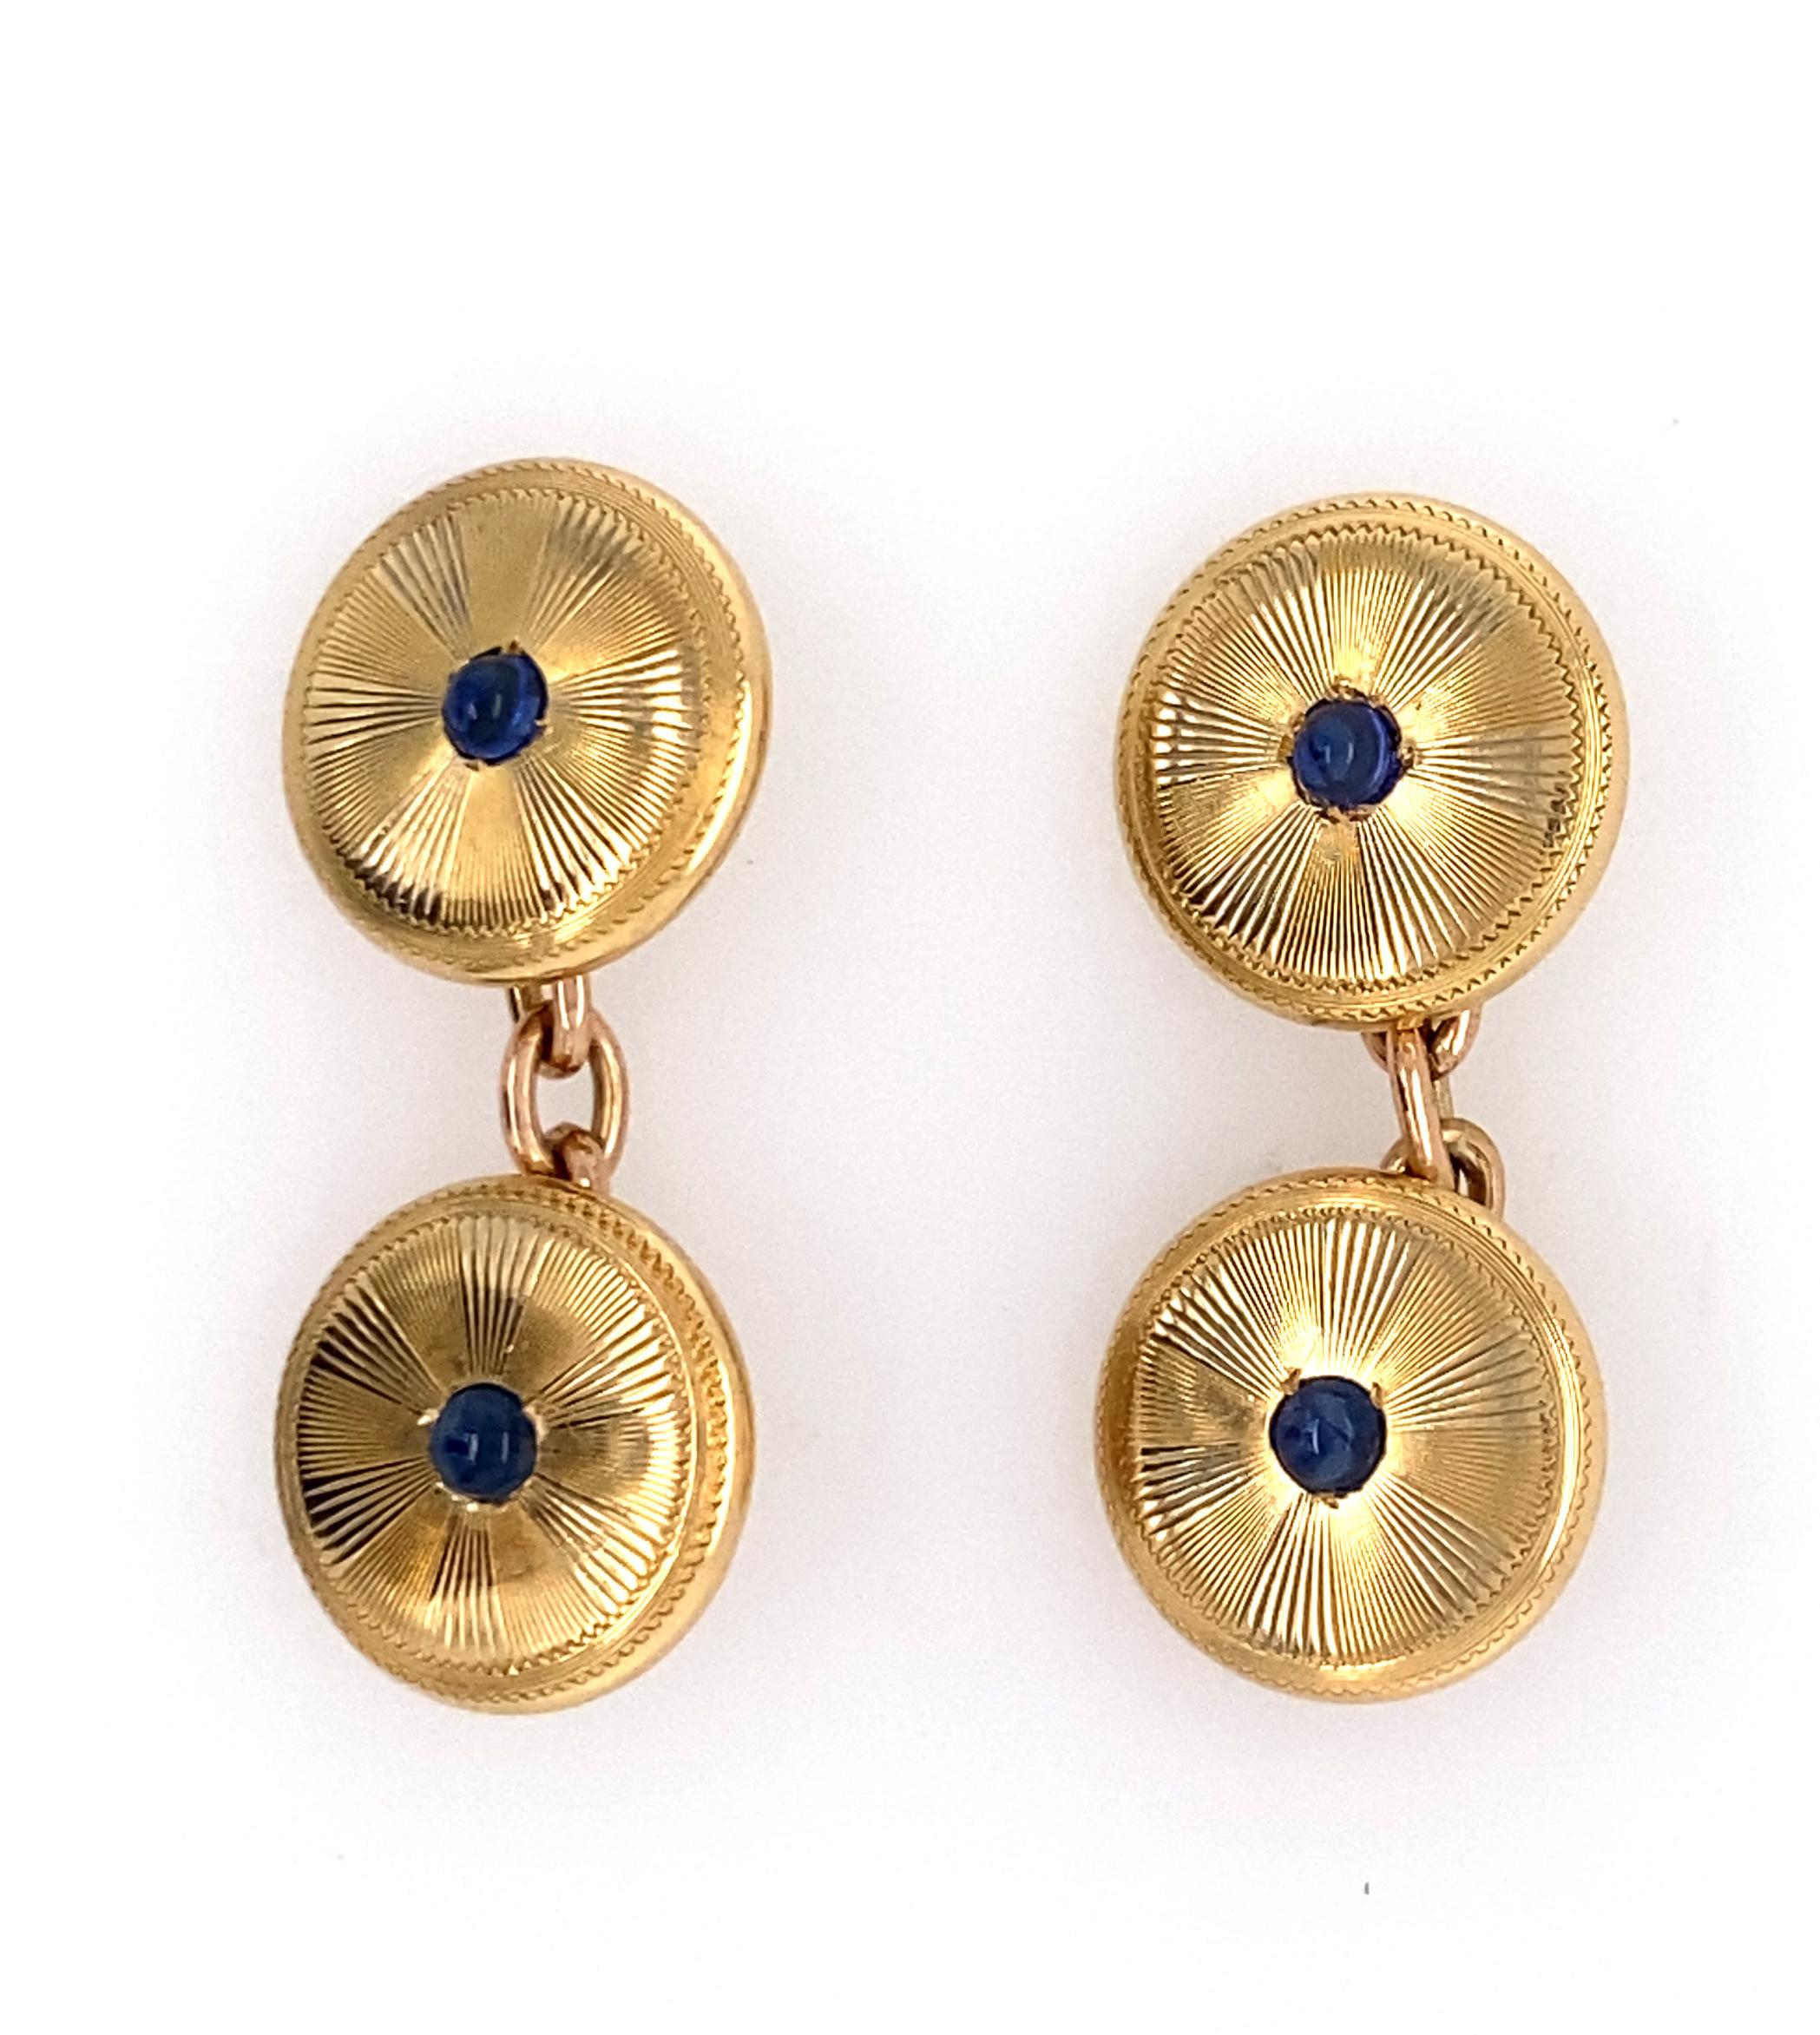 18k yellow gold and sapphire cabochon french double cufflinks. Approx. 3.50 cm long. f